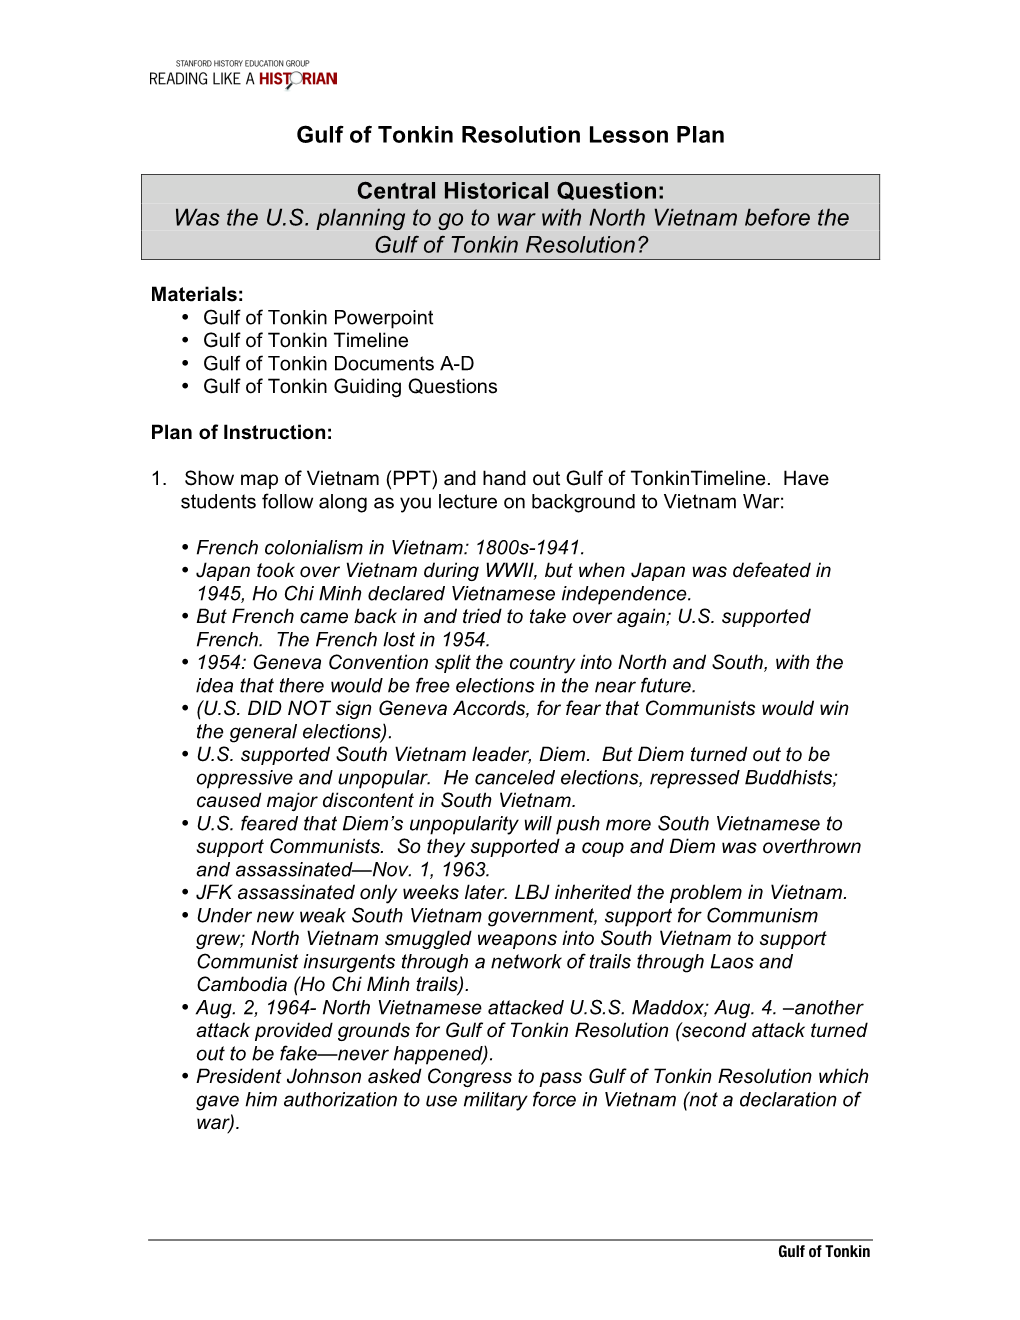 Gulf of Tonkin Resolution Lesson Plan Central Historical Question